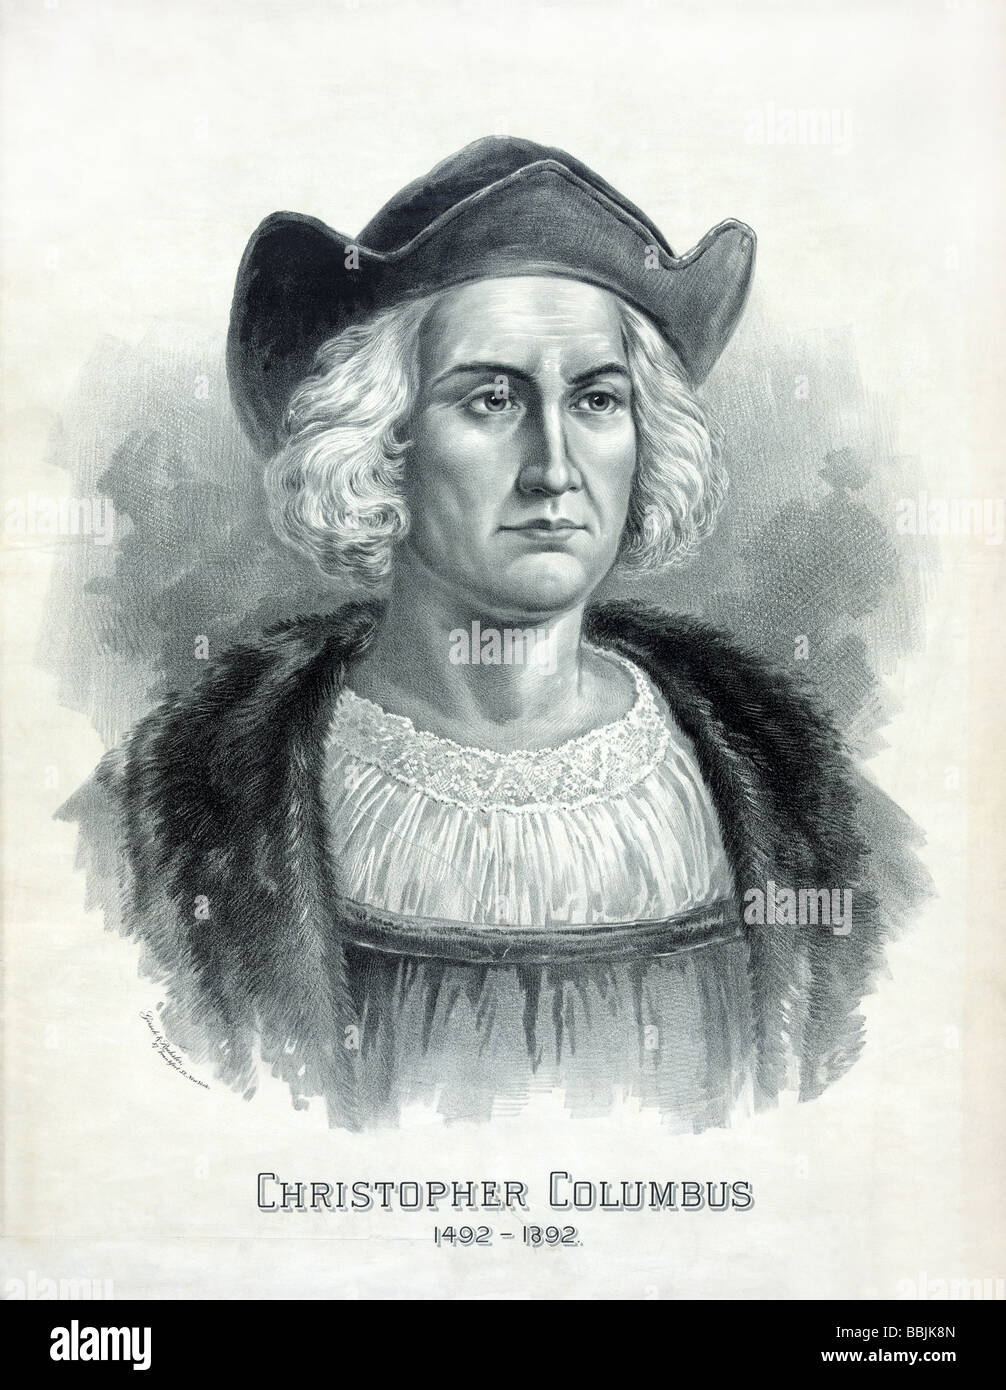 Portrait Of Christopher Columbus Published C1892 By Girsch And Roehsler